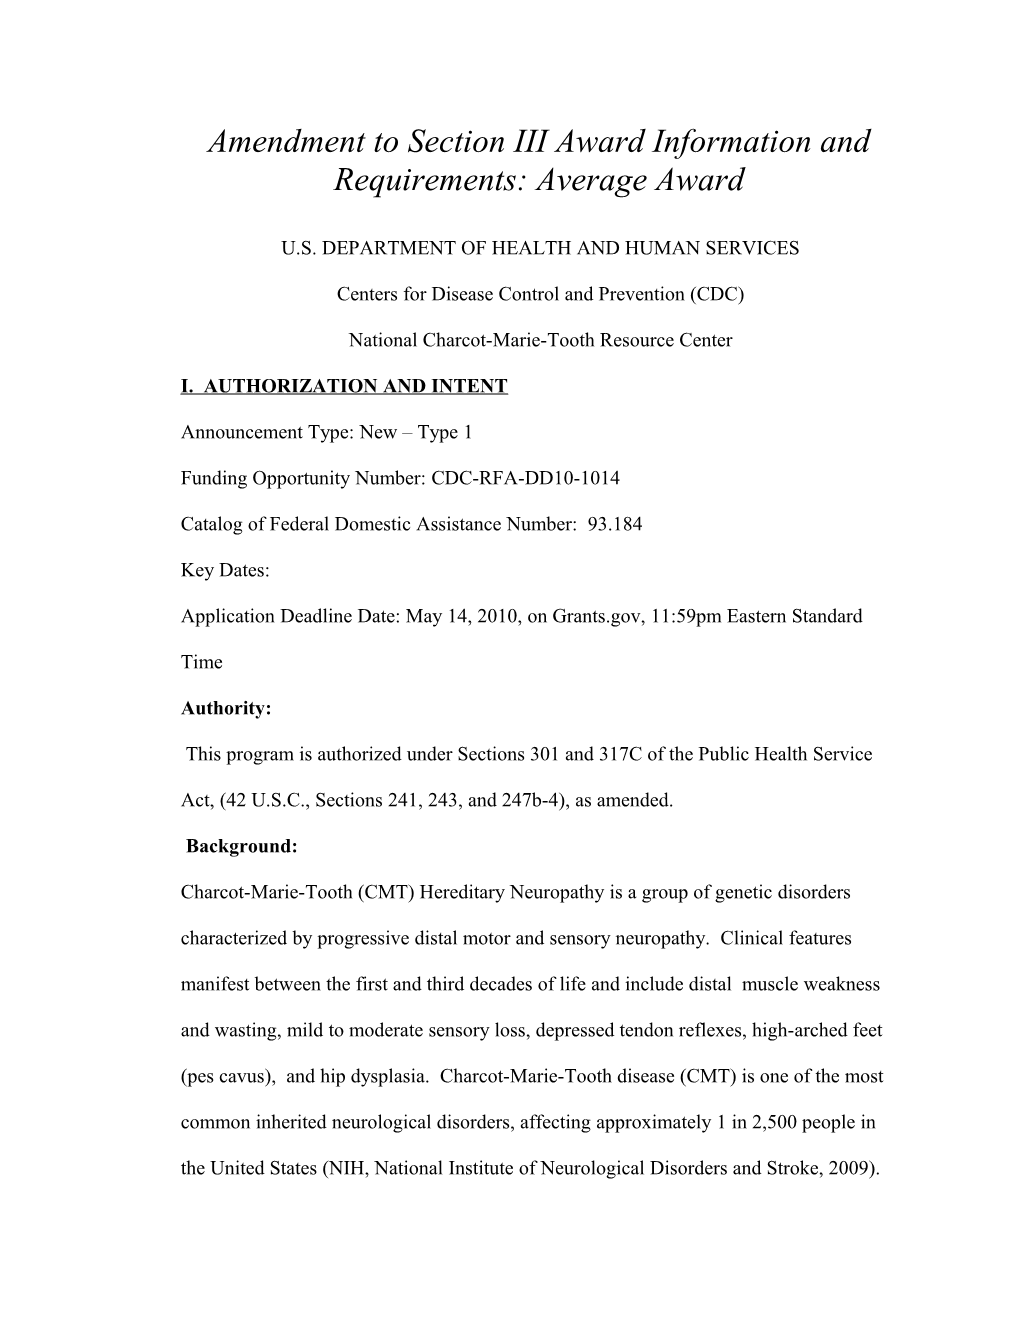 Amendment to Section III Award Information and Requirements: Average Award